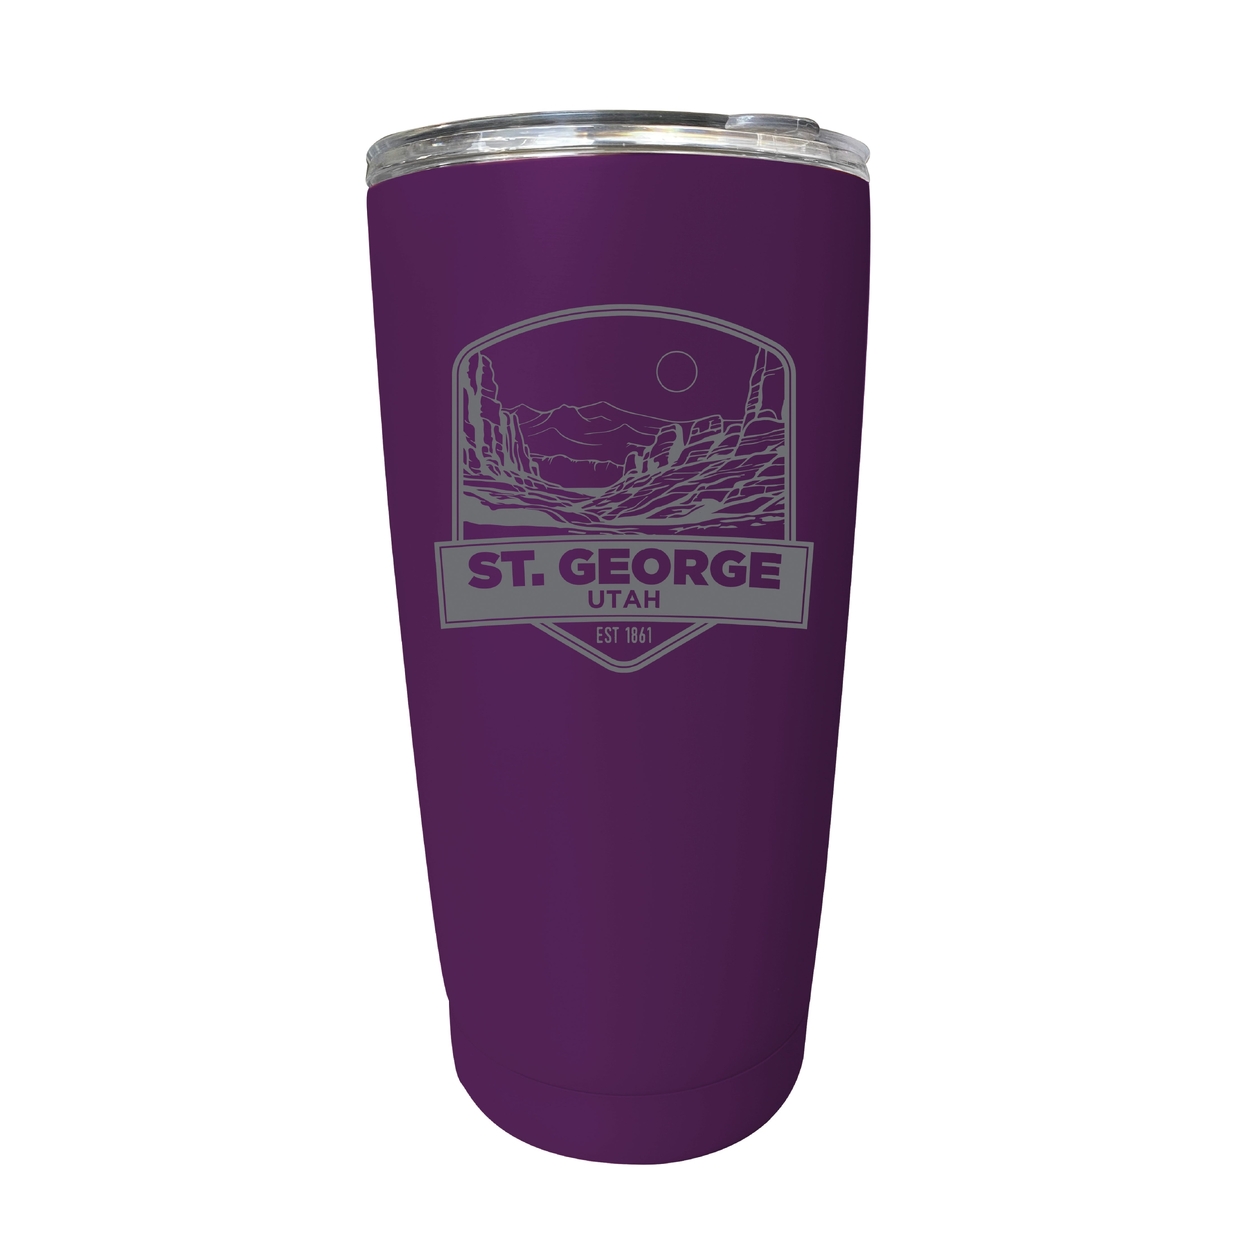 St. George Utah Souvenir 16 Oz Engraved Stainless Steel Insulated Tumbler - Pink,,Single Unit